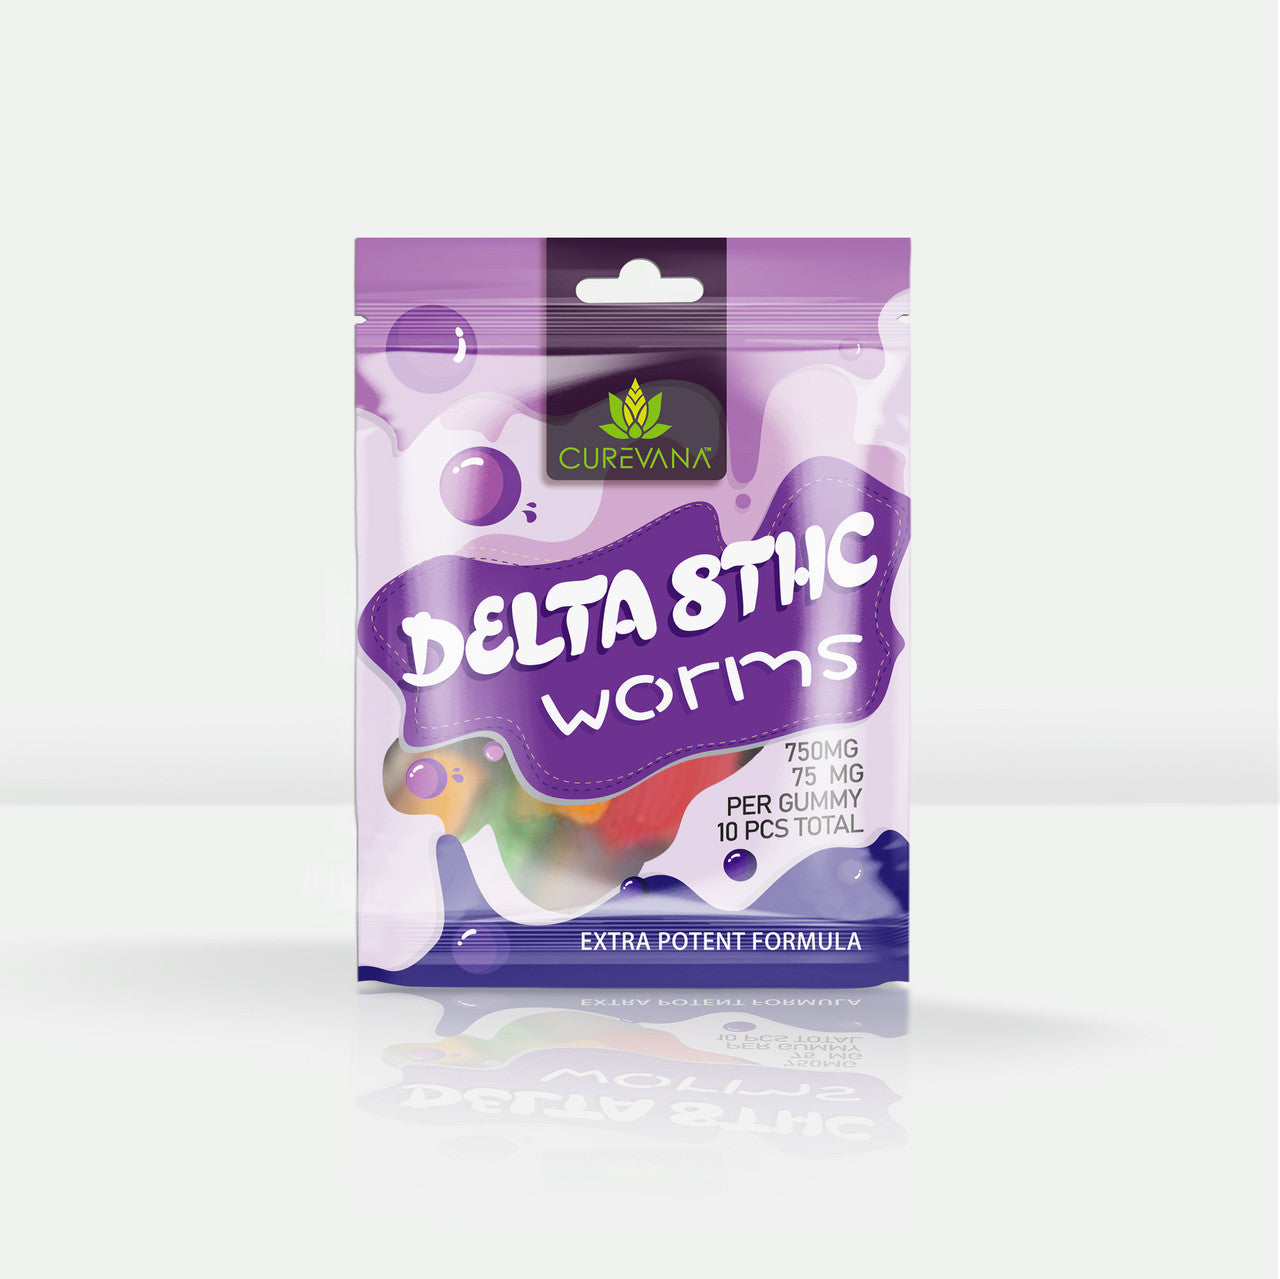 CUREVANA DELTA 8 THC INFUSED GUMMIES (750MG)